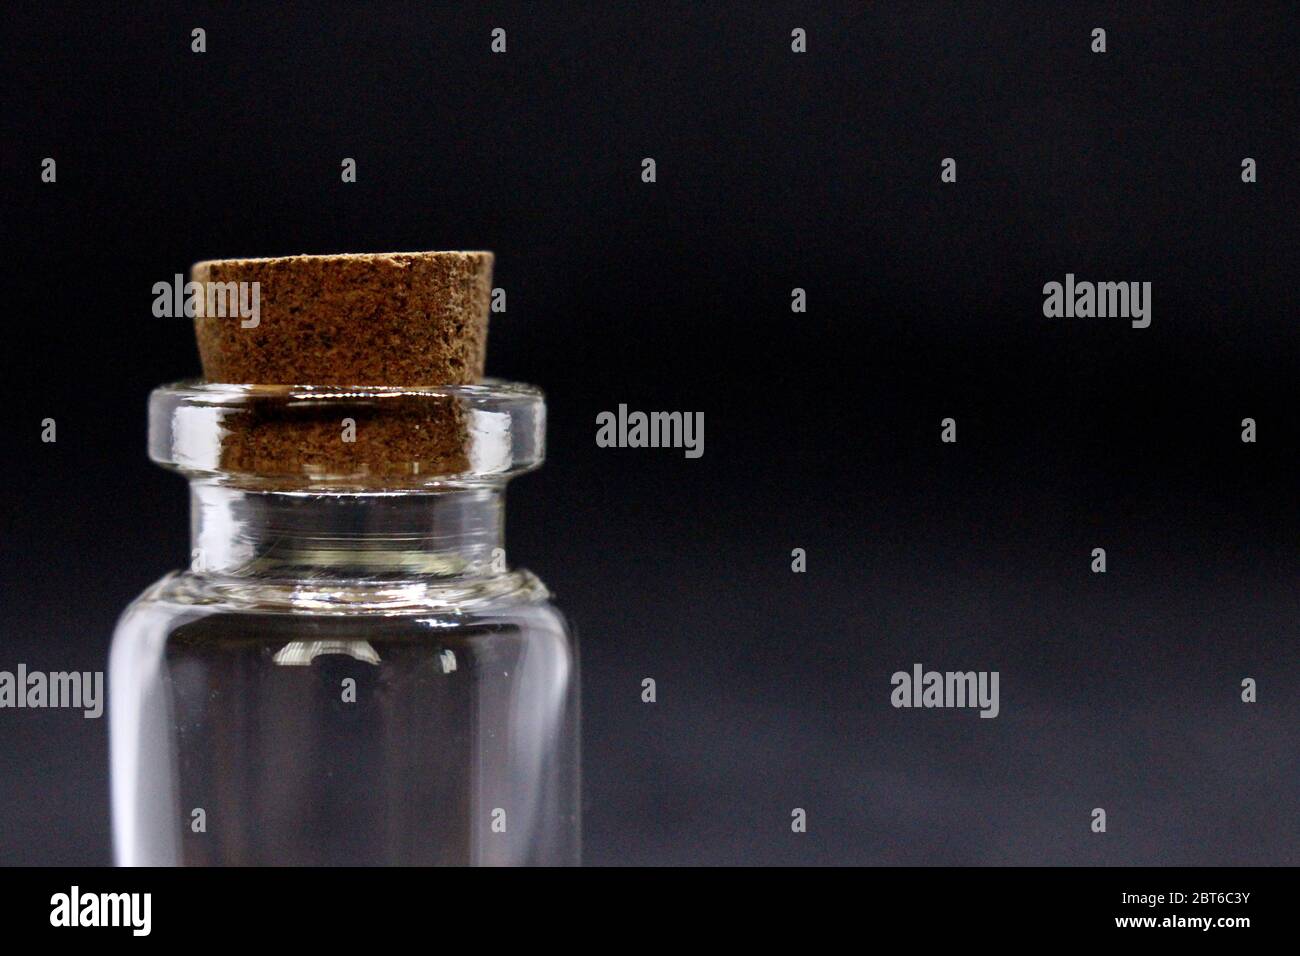 A close up photograph of one empty glass bottles with cork stopper, against a black background Stock Photo